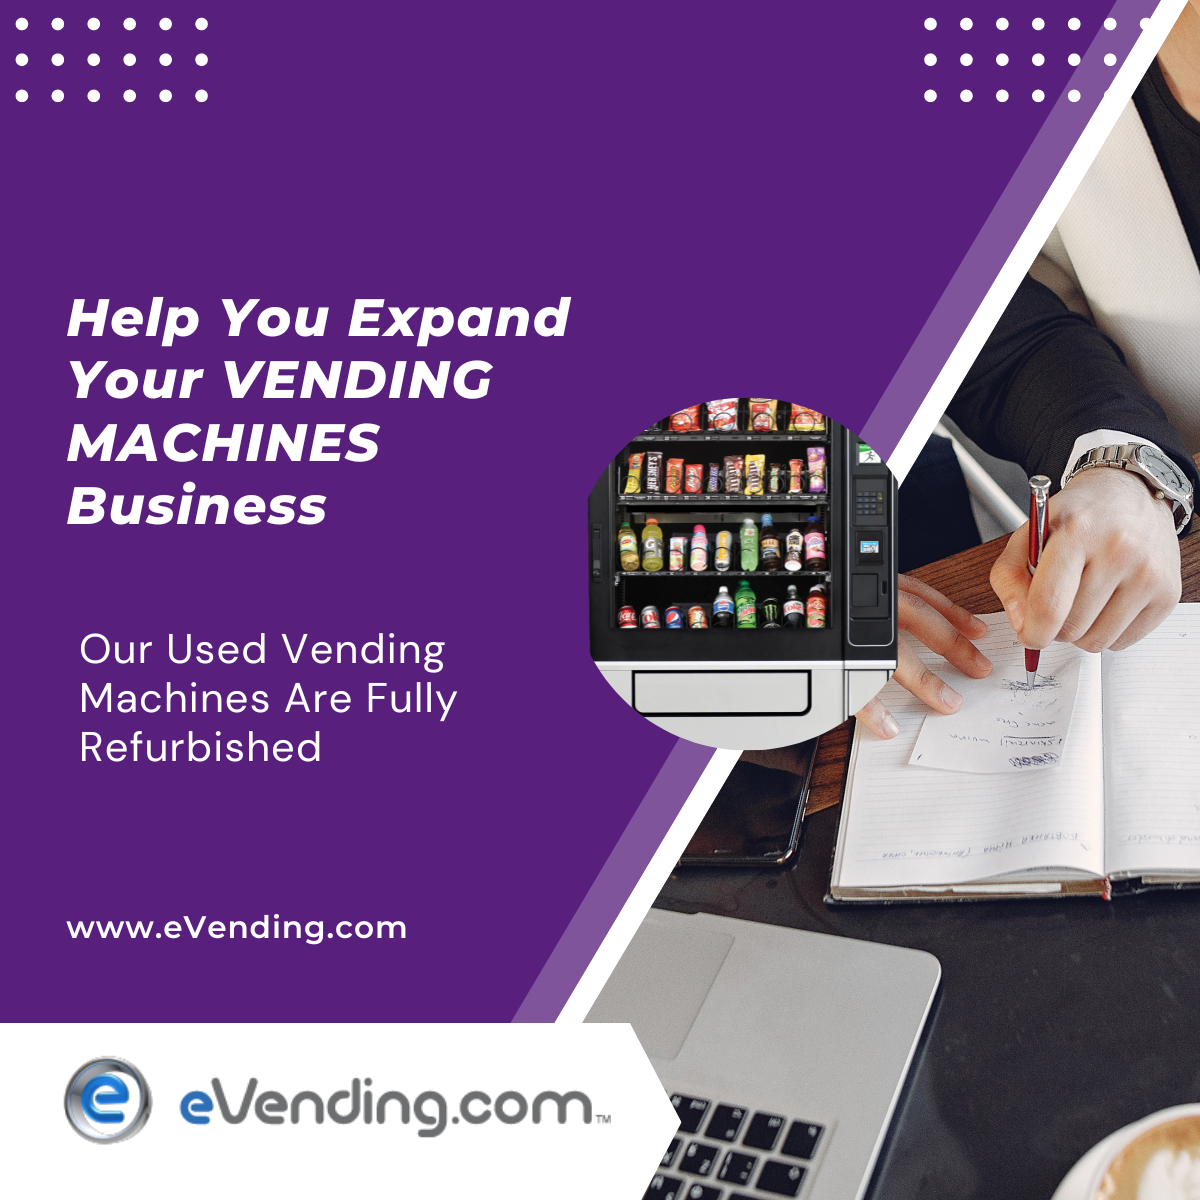 USED VENDING MACHINES CAN HELP YOU EXPAND YOUR BUSINESS